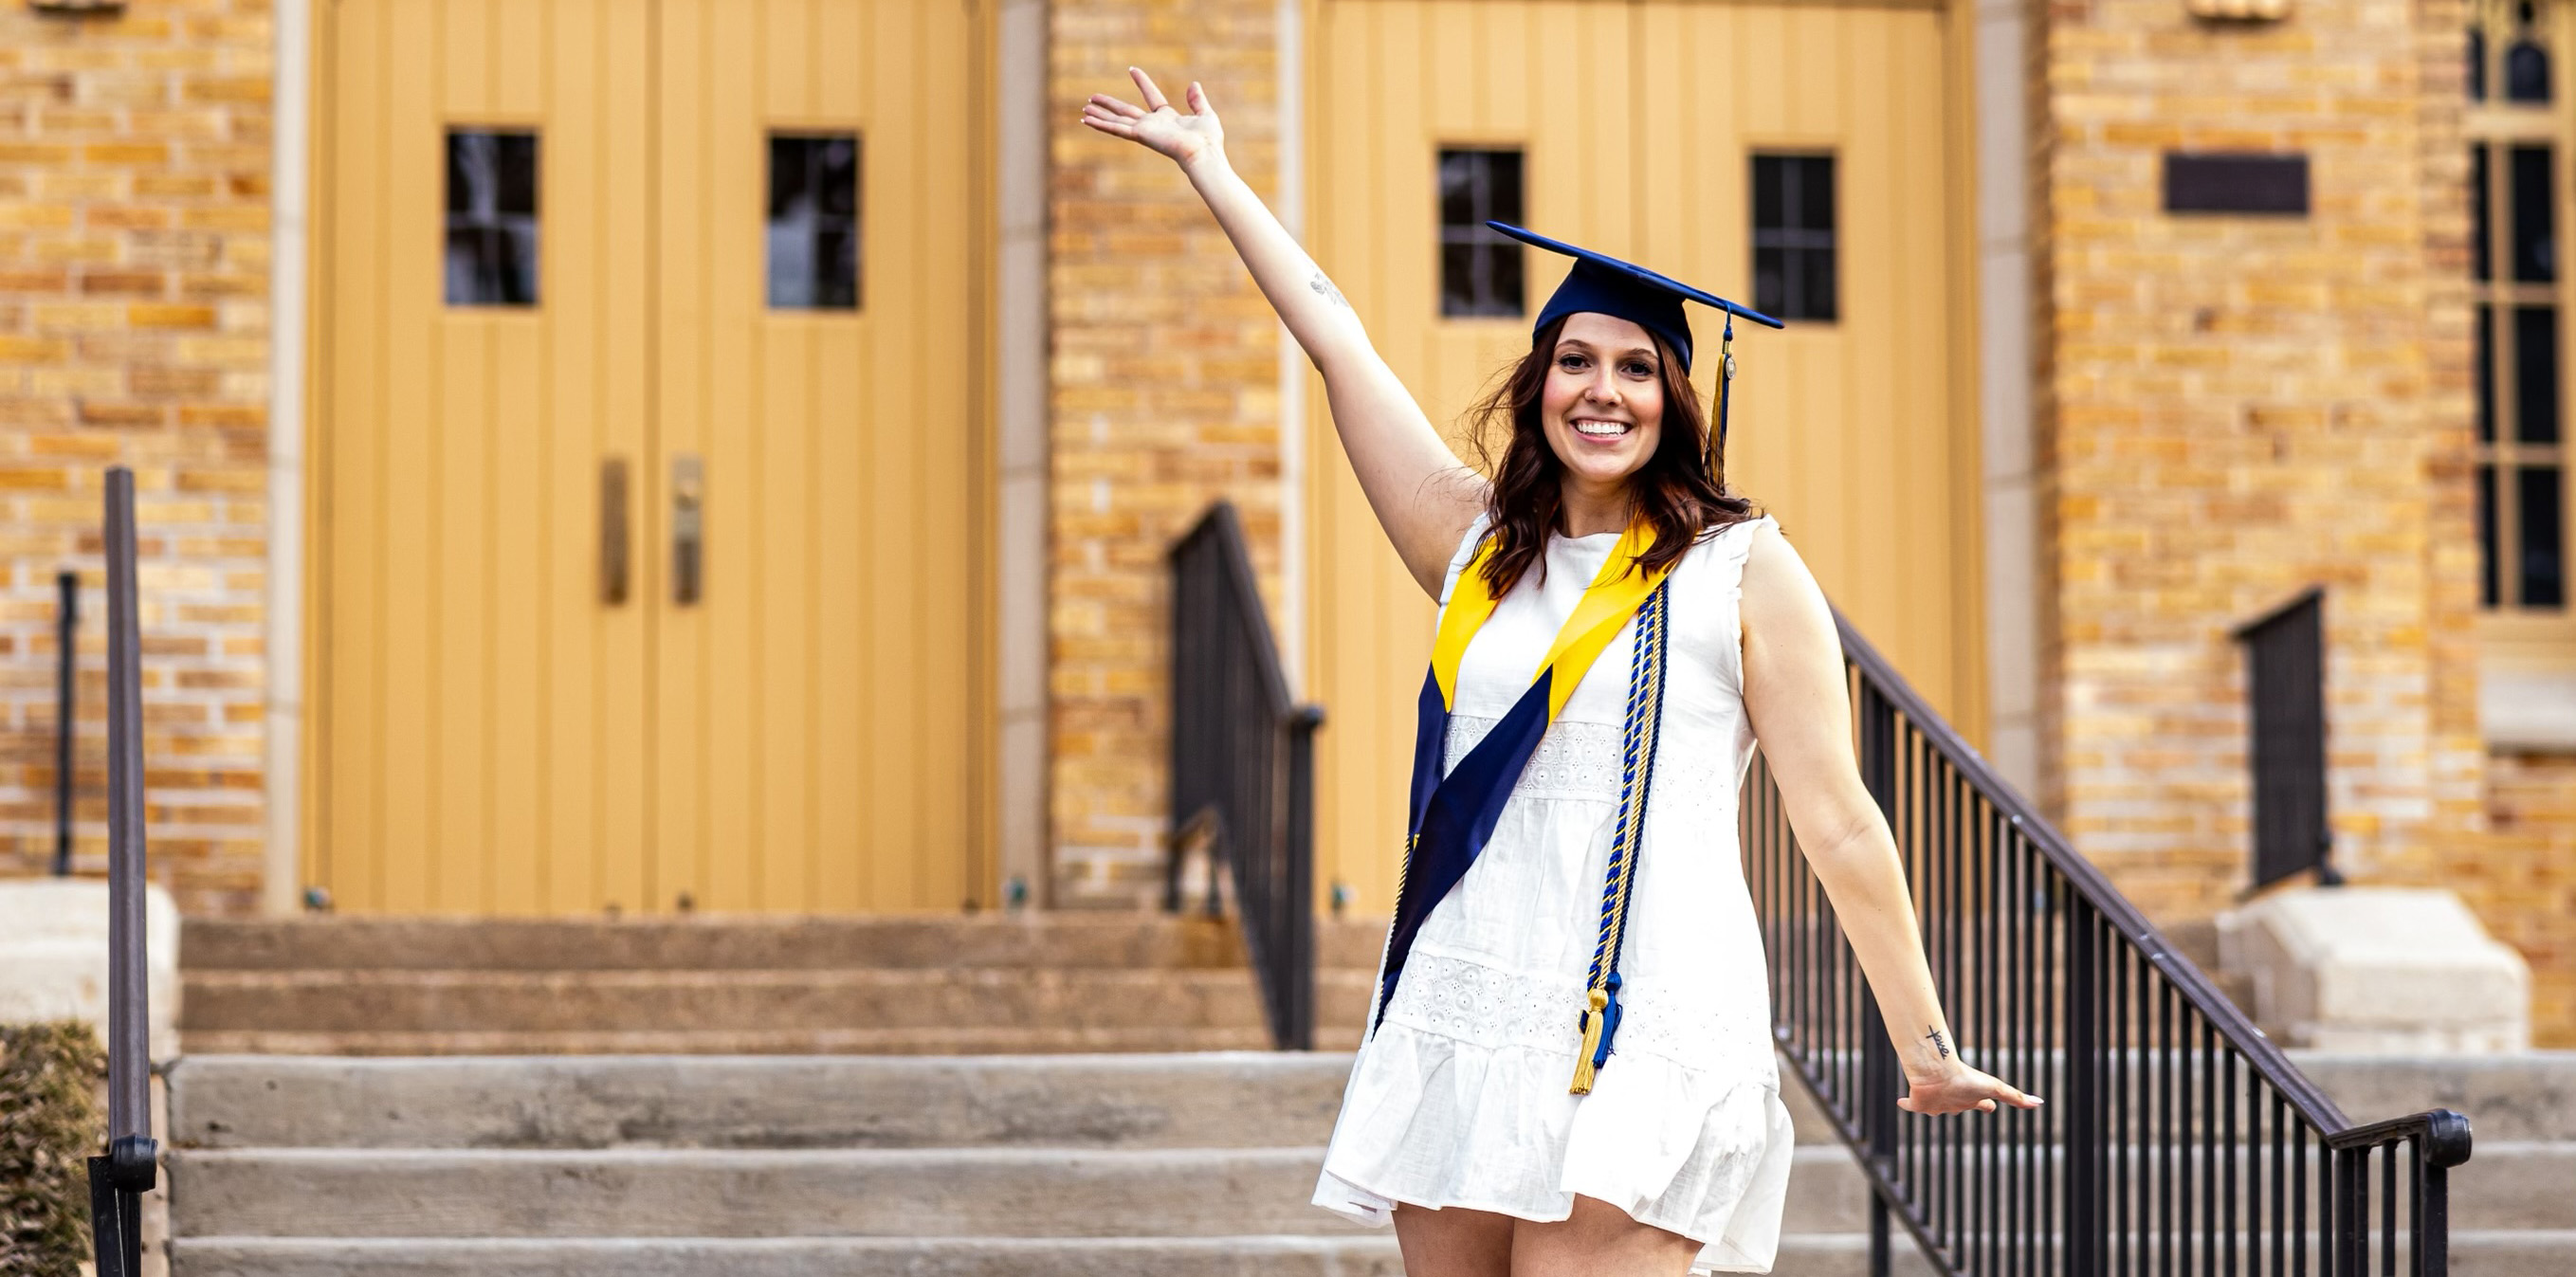 HannahGrace posing with her graduation cap with her arm in the air